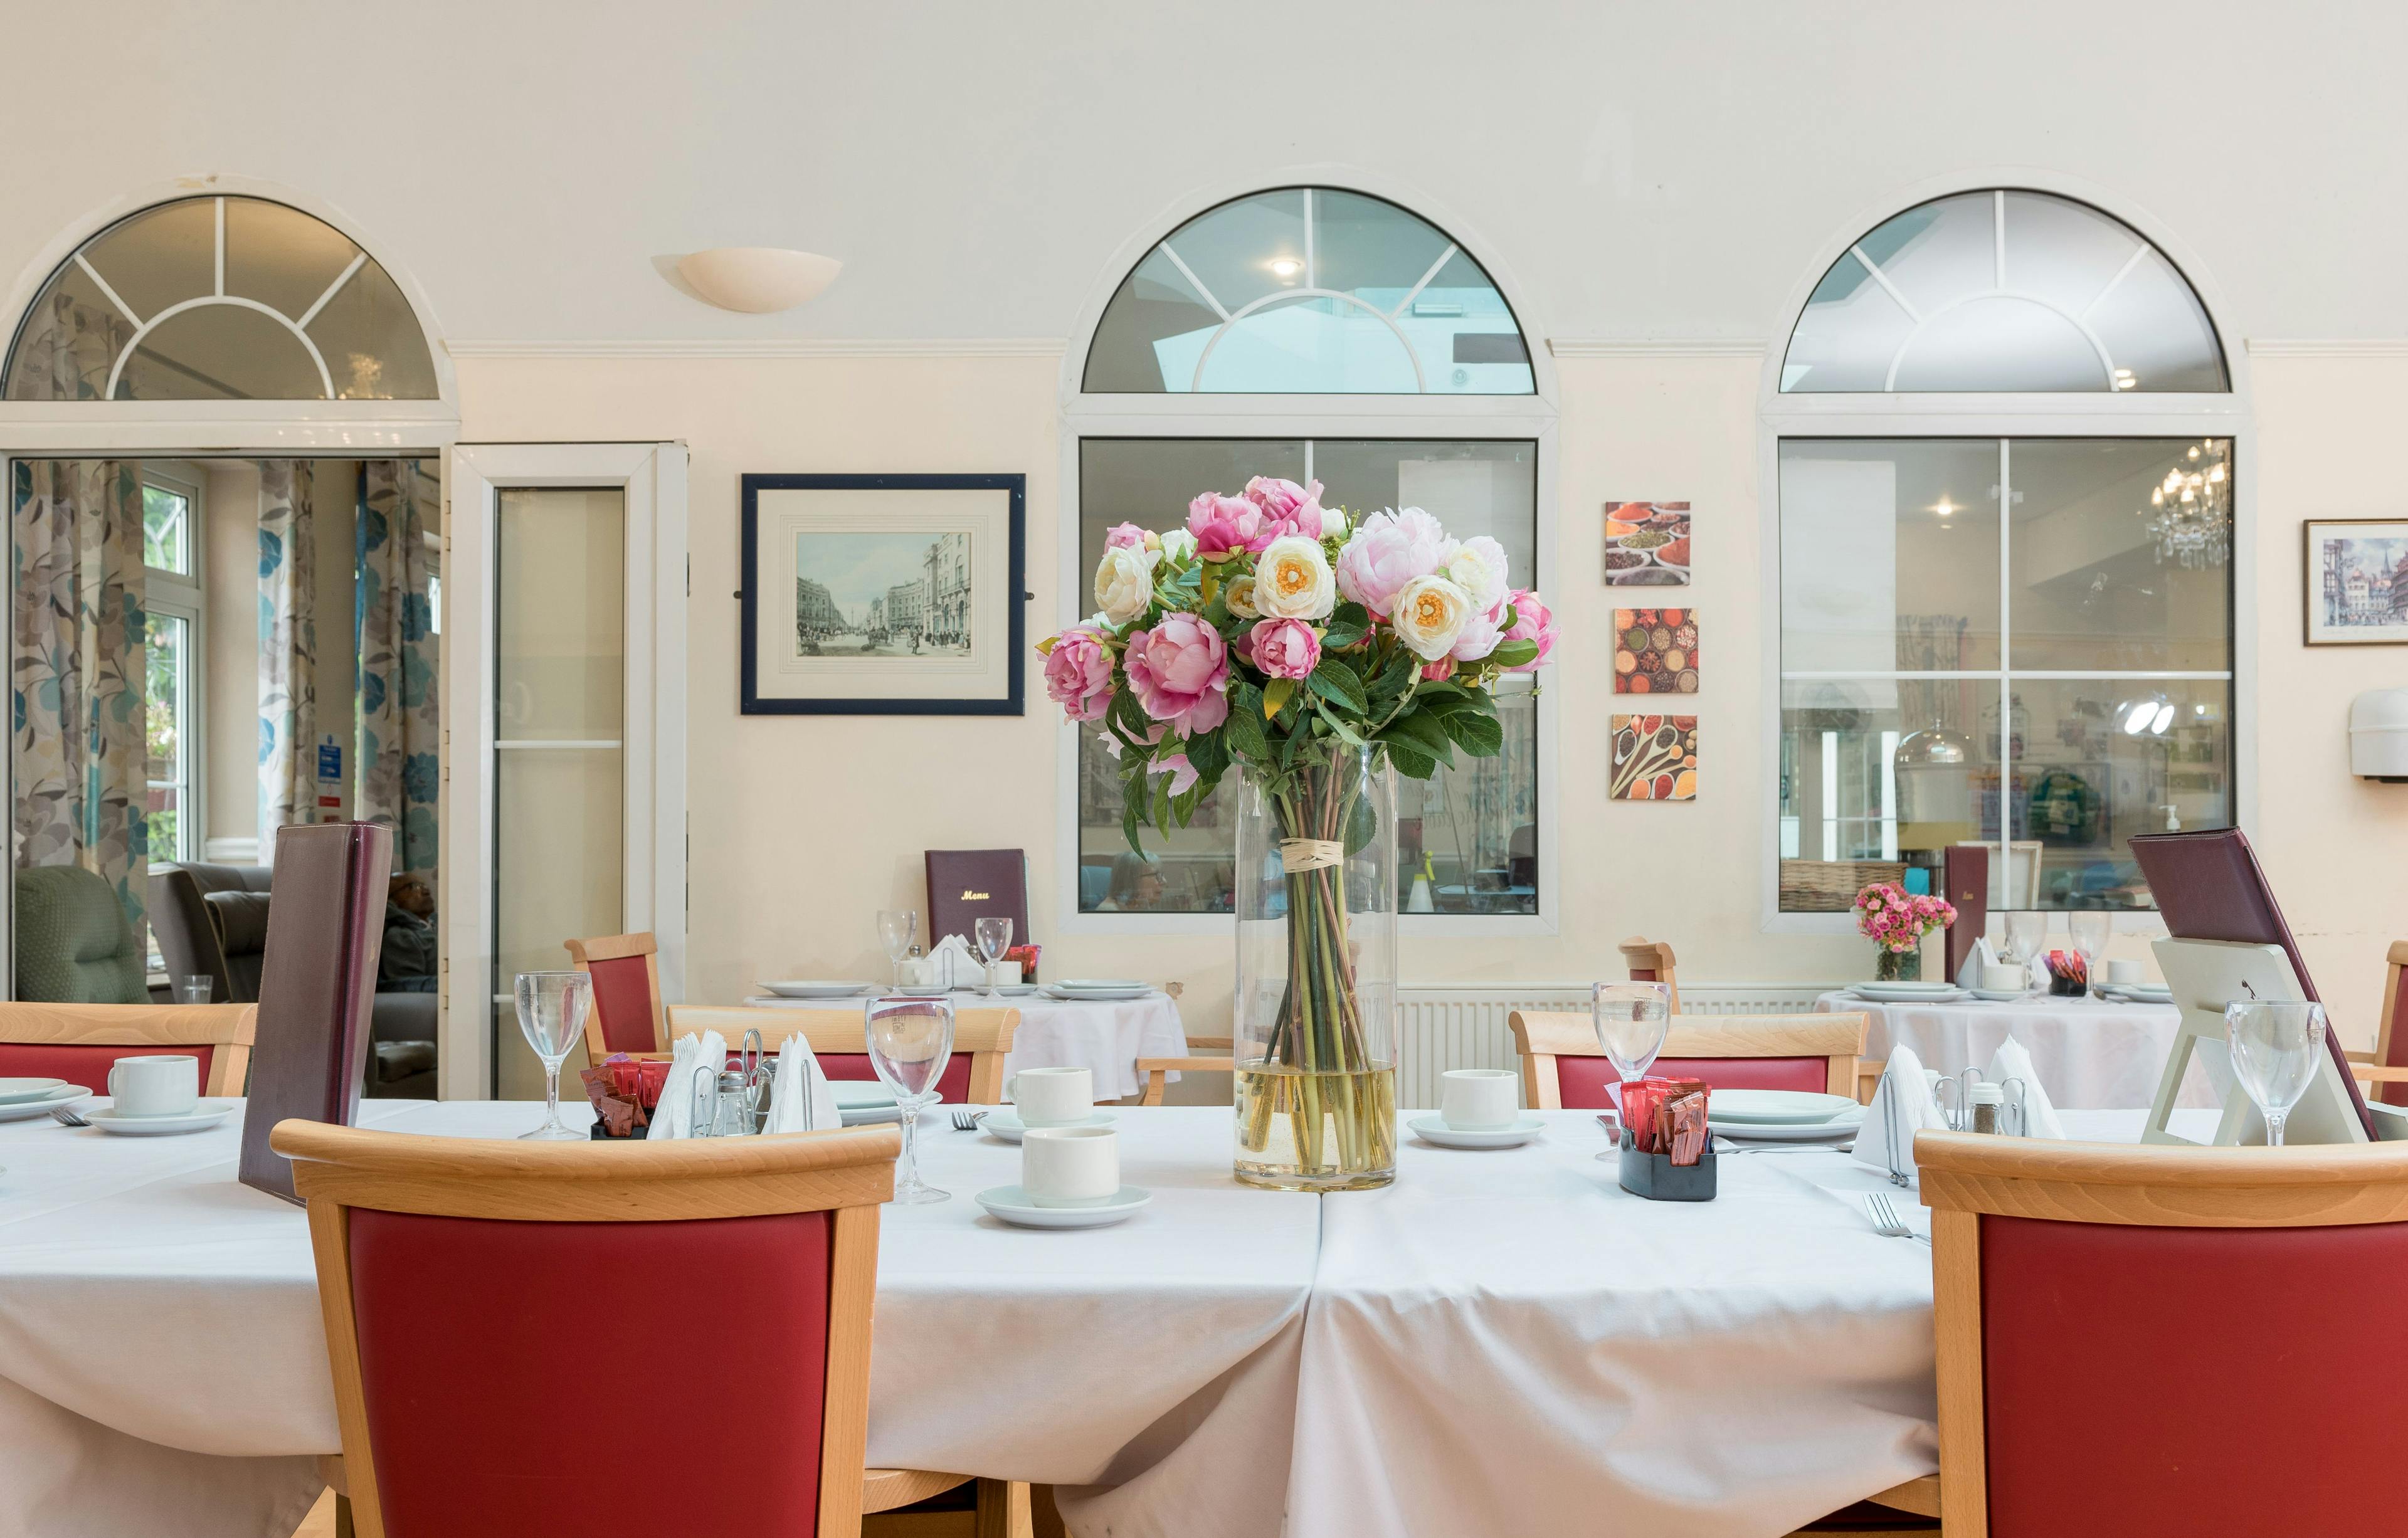 Dining room of The Cedars care home in Barnet, London